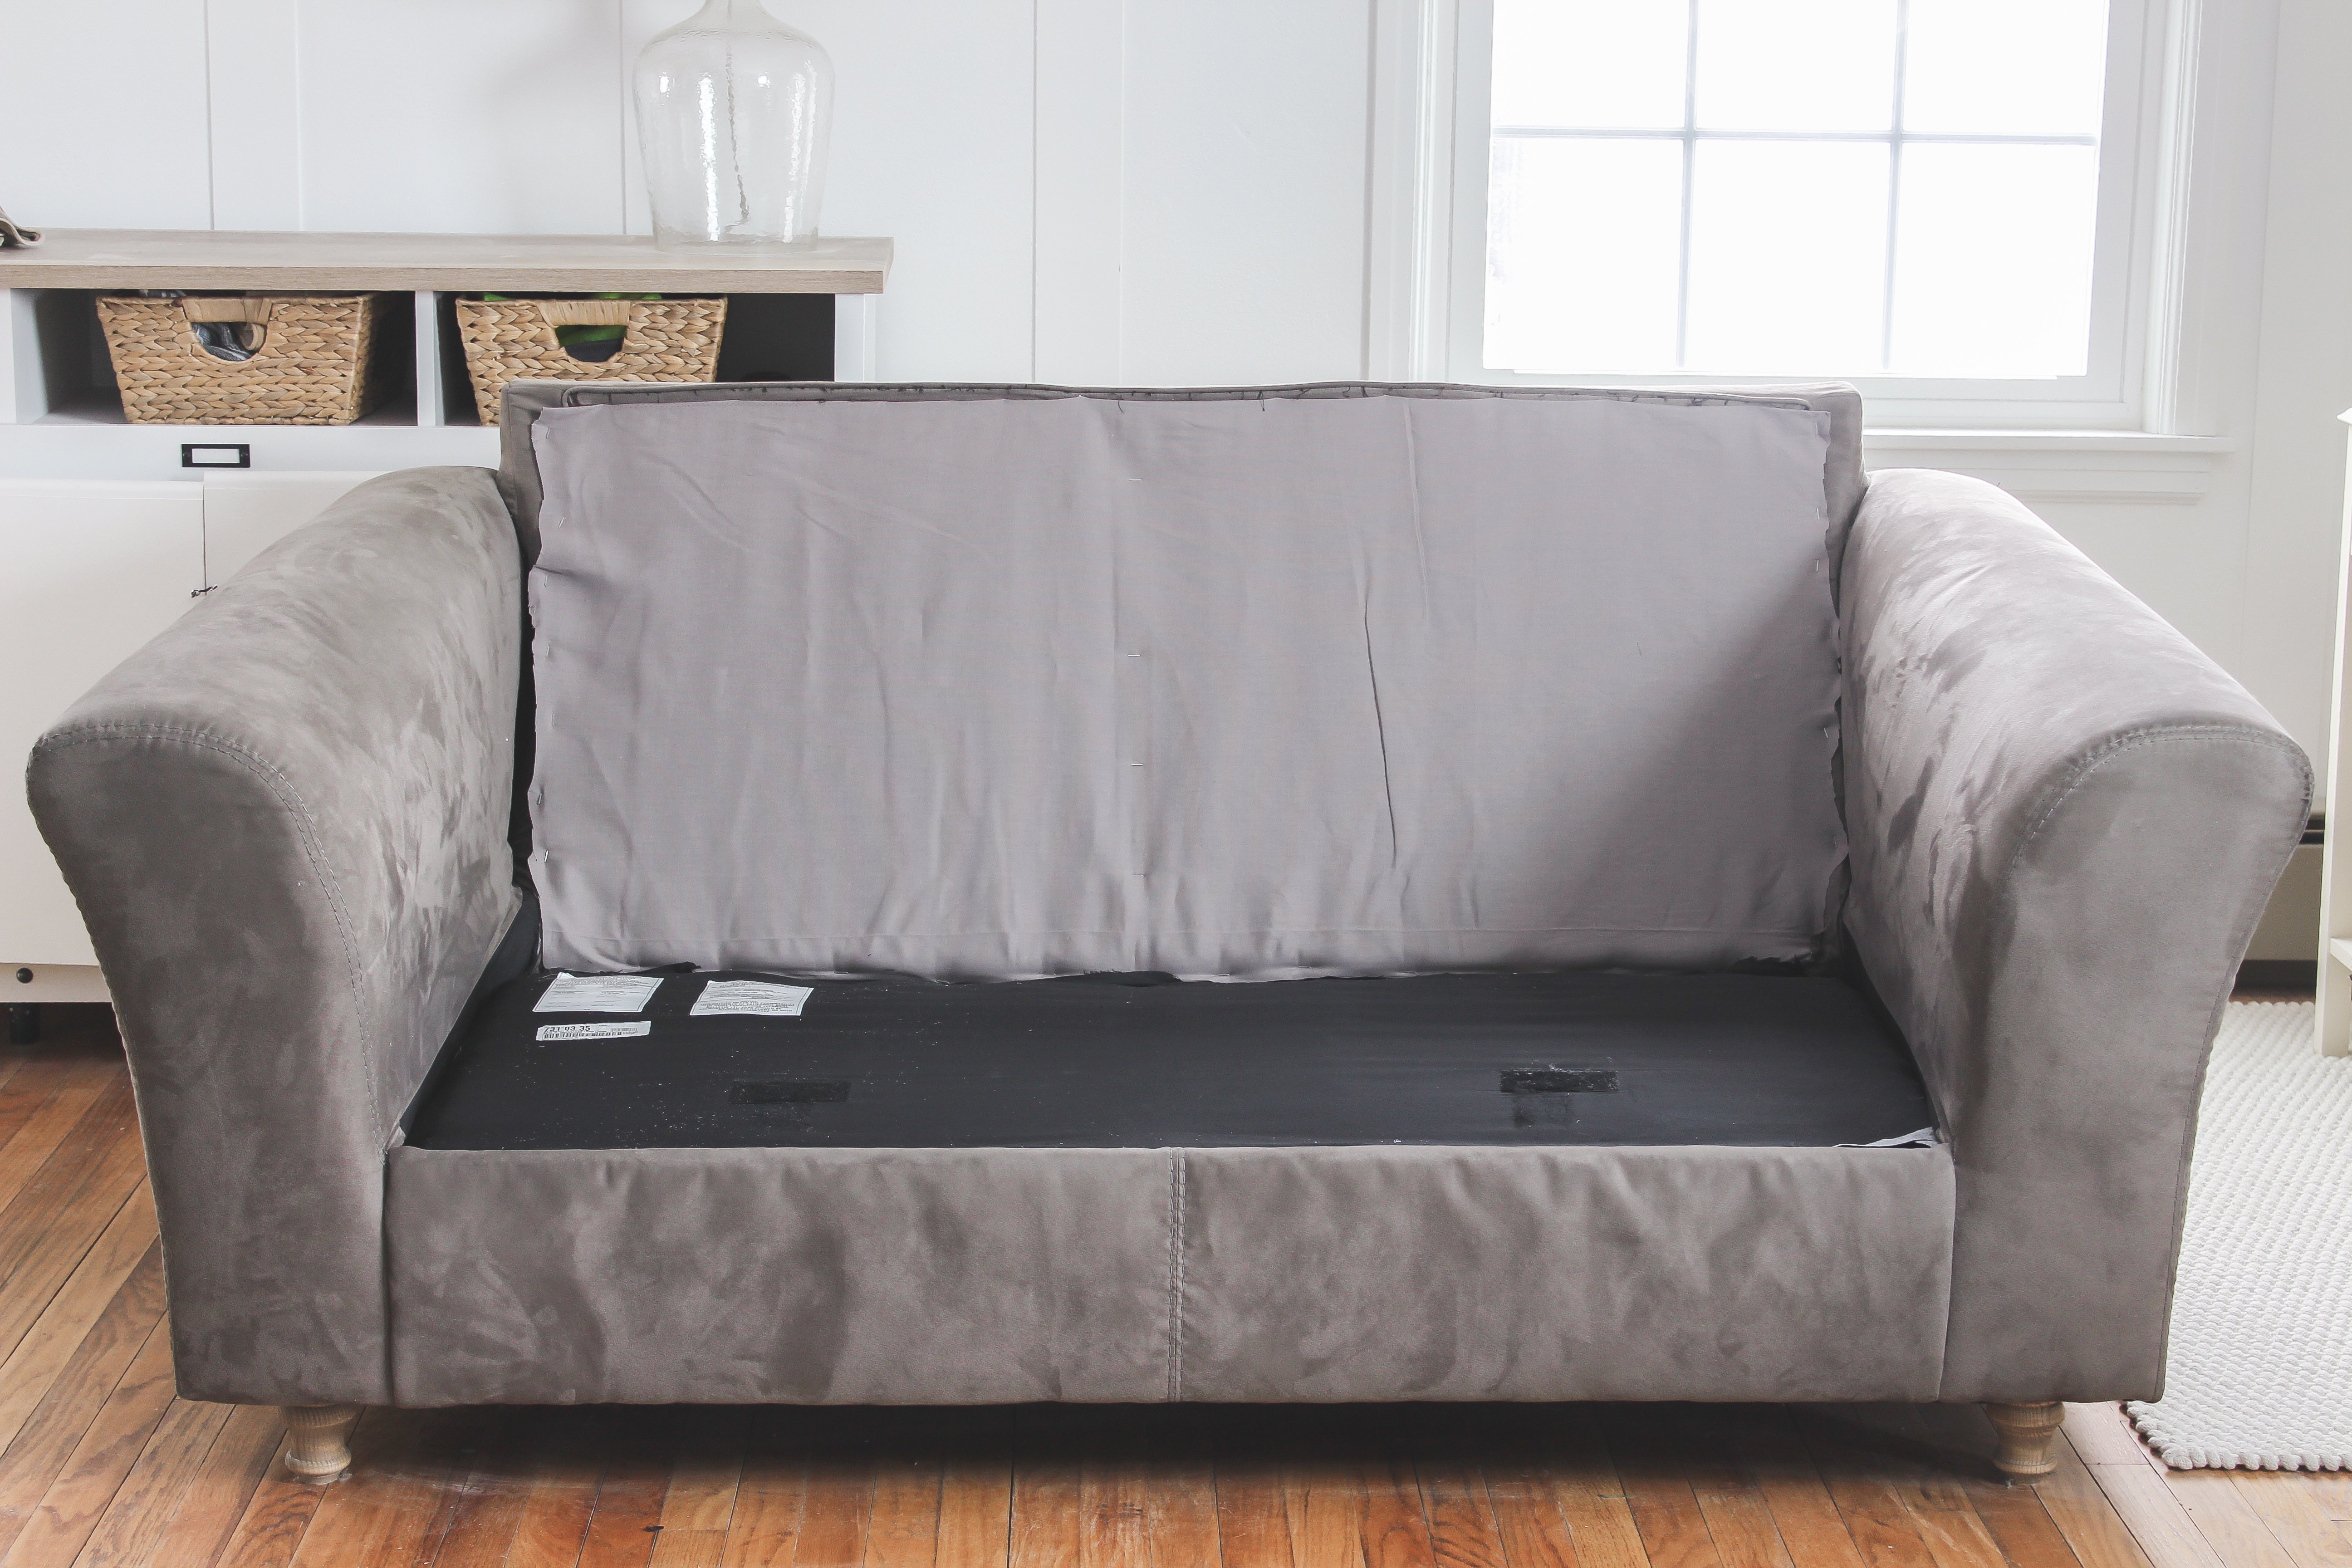 How To Fix A Sagging Couch Re, How To Fix A Sleeper Sofa